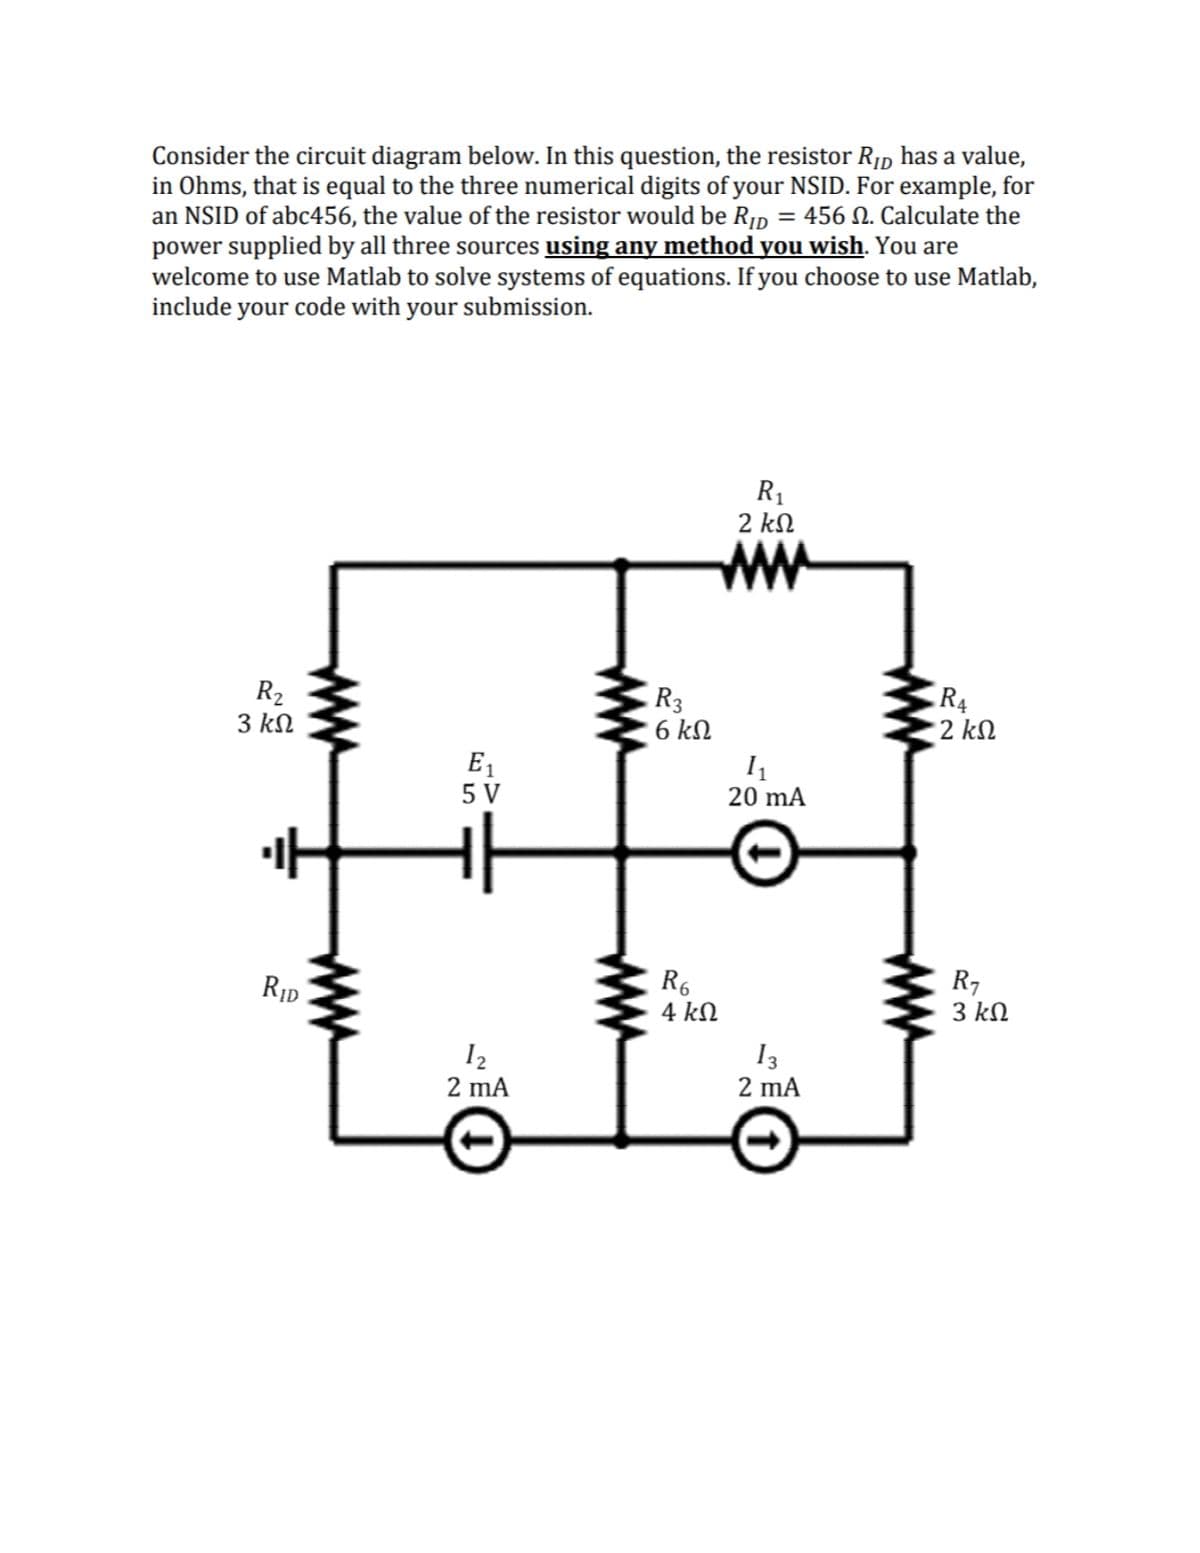 Consider the circuit diagram below. In this question, the resistor R1p has a value,
in Ohms, that is equal to the three numerical digits of your NSID. For example, for
an NSID of abc456, the value of the resistor would be R¡D = 456 N. Calculate the
power supplied by all three sources using any method you wish. You are
welcome to use Matlab to solve systems of equations. If you choose to use Matlab,
include your code with your submission.
R1
2 kN
ww
R2
3 kN
R3
6 kN
R4
2 kN
E1
5 V
20 mA
R7
3 kN
RID
4 kN
I2
2 mA
I3
2 mA
ww
ww
ww
ww
ww
ww
